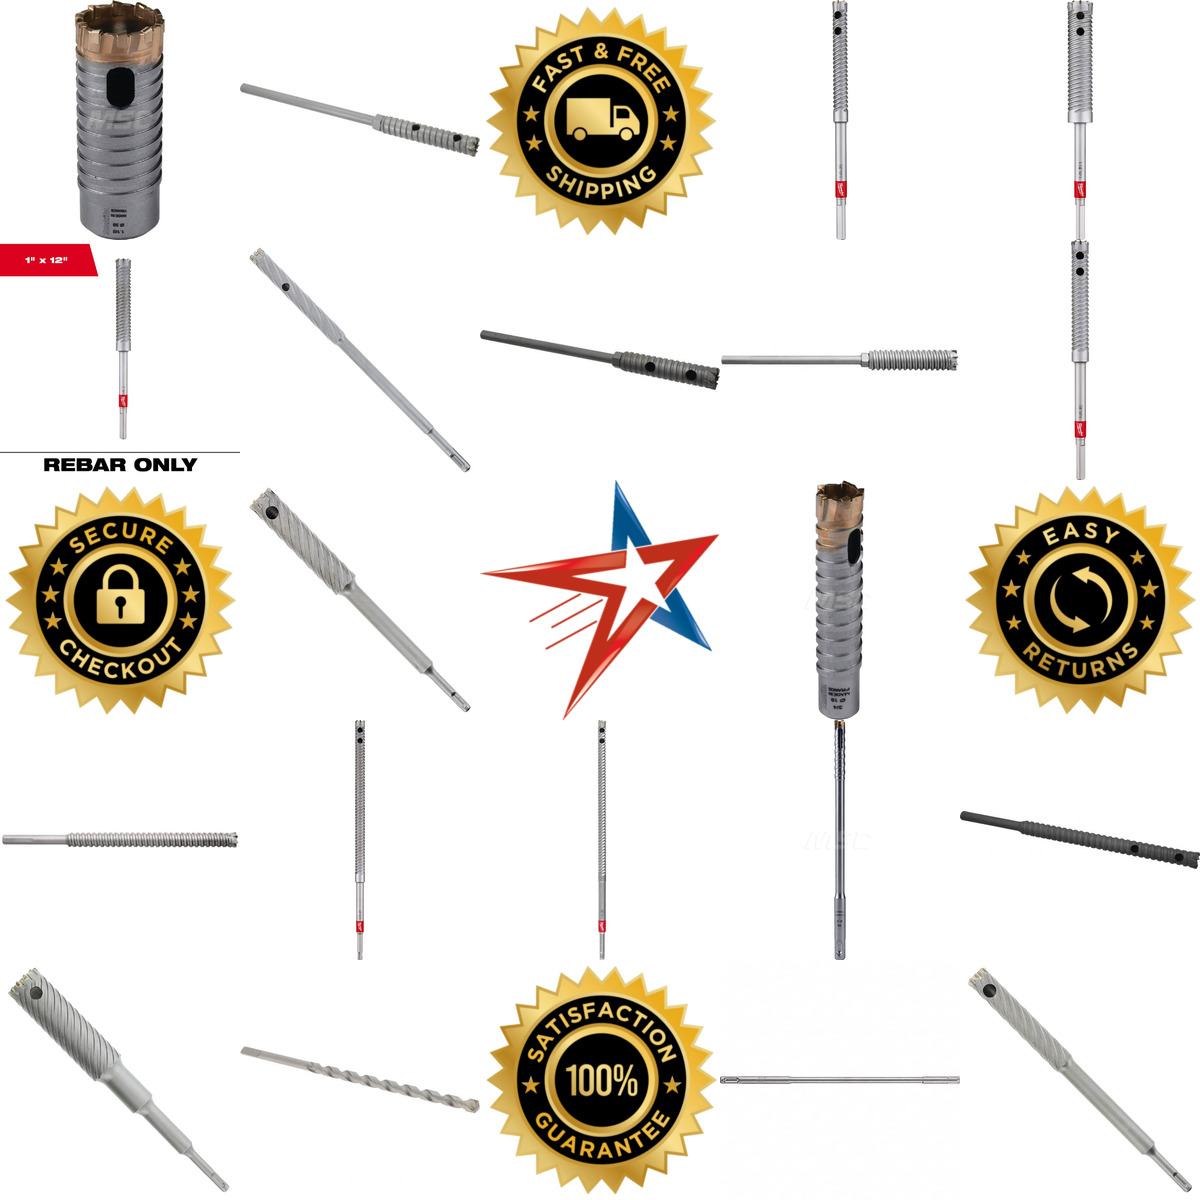 A selection of Rebar Cutter Drill Bits products on GoVets